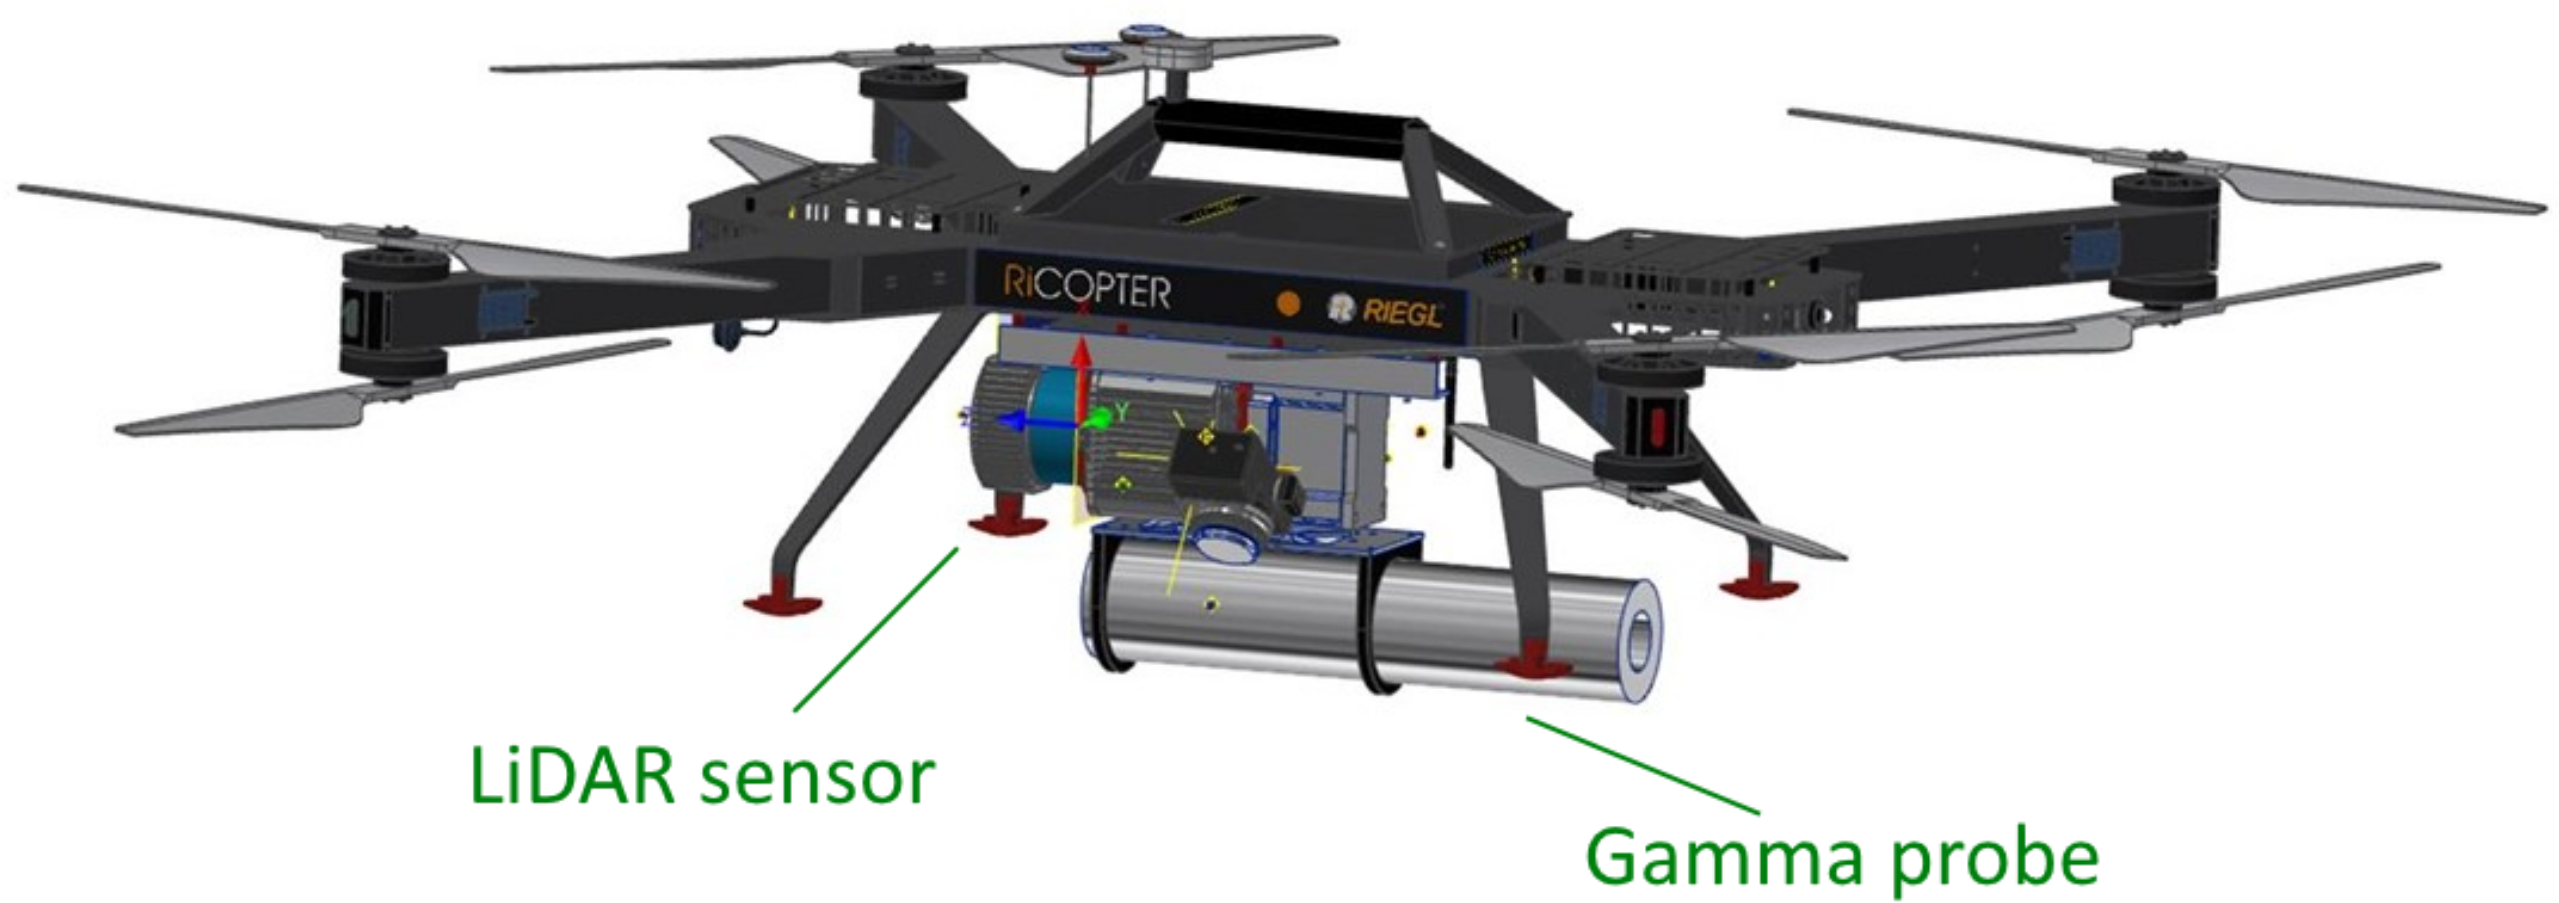 Sensors | Free Full-Text | Real-Time Gamma Radioactive Source Localization  by Data Fusion of 3D-LiDAR Terrain Scan and Radiation Data from  Semi-Autonomous UAV Flights